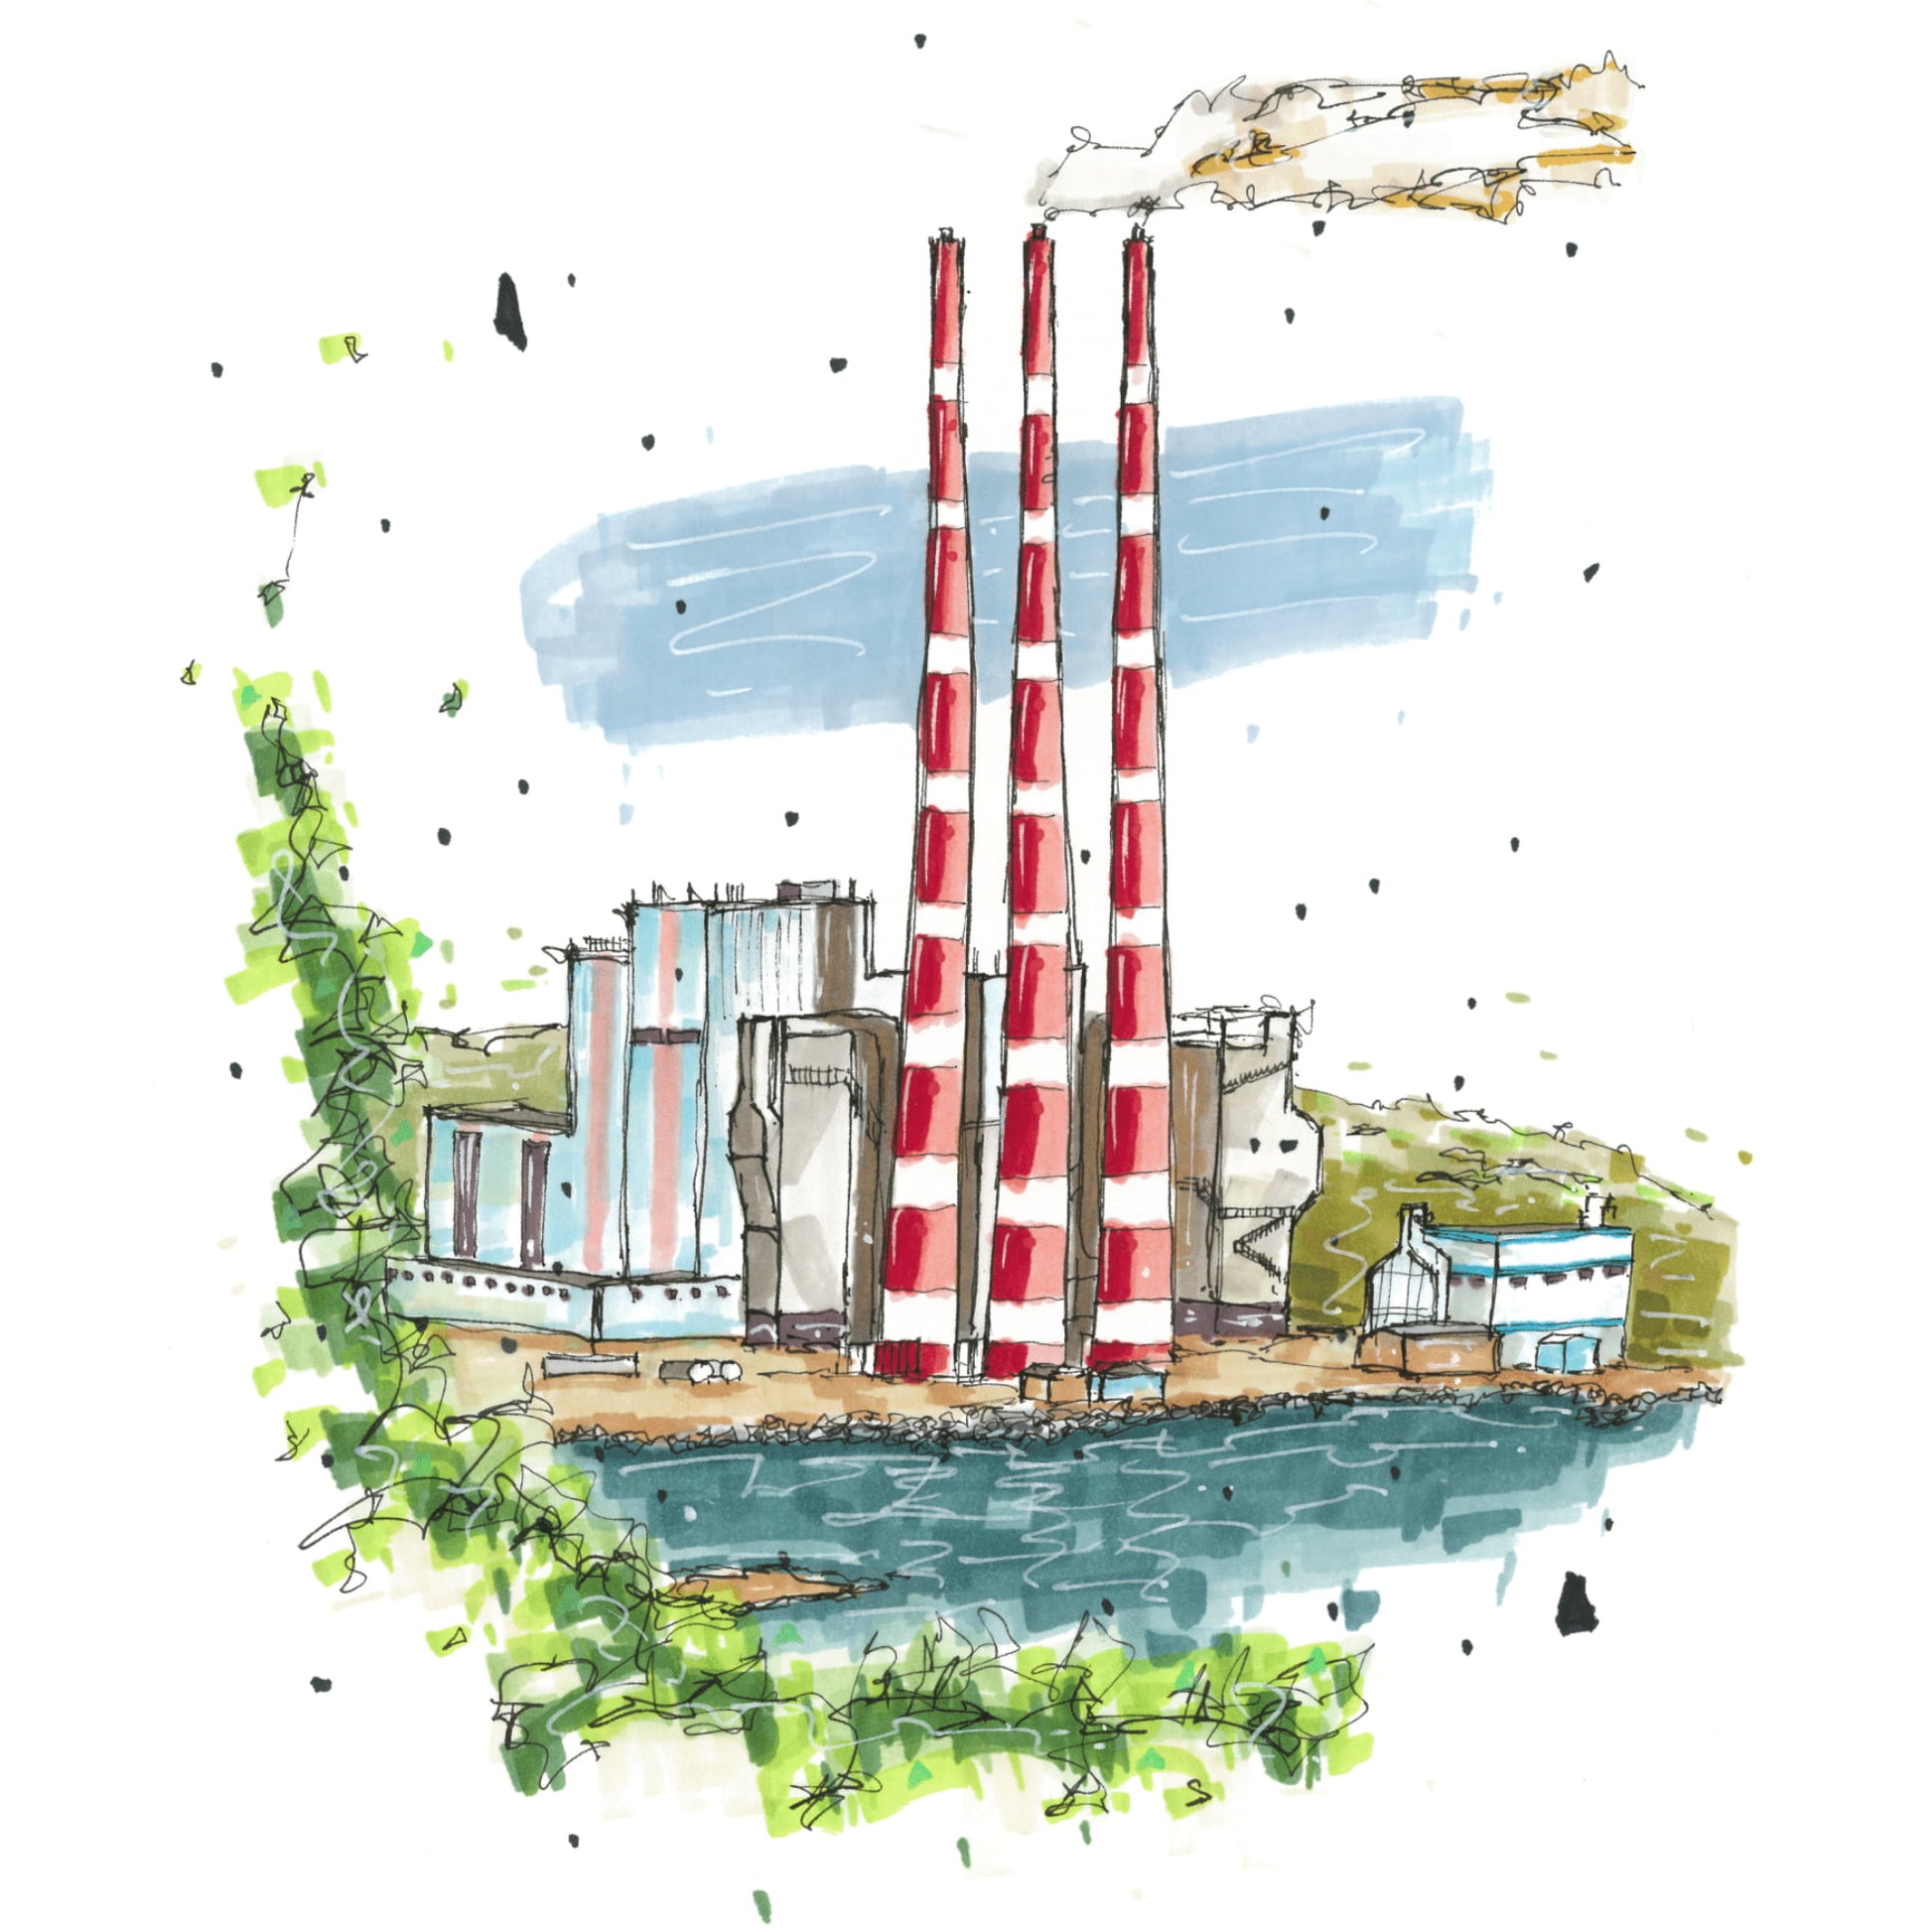 Tufts Cove Generating Station in Colour, Dartmouth, Nova Scotia, Greeting Card, Downtownsketcher, Wynand van Niekerk, DTS0062